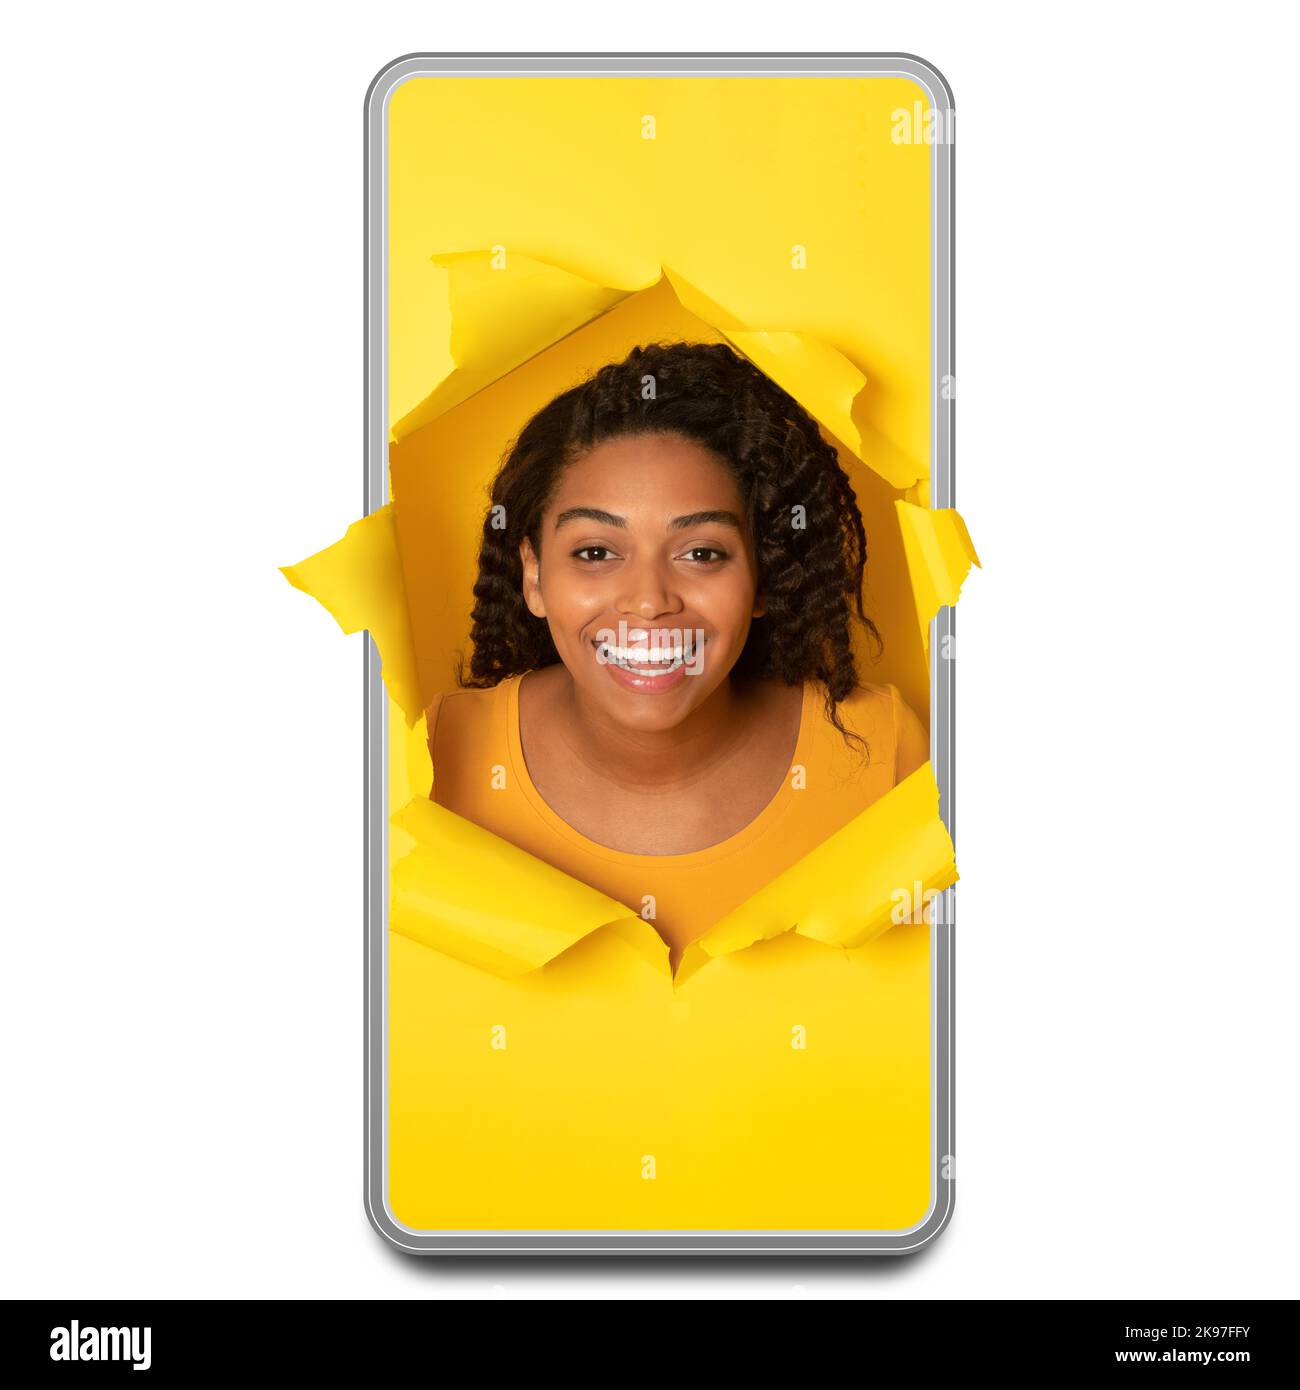 Black Woman In Phone Screen Posing In Torn Background, Collage Stock Photo